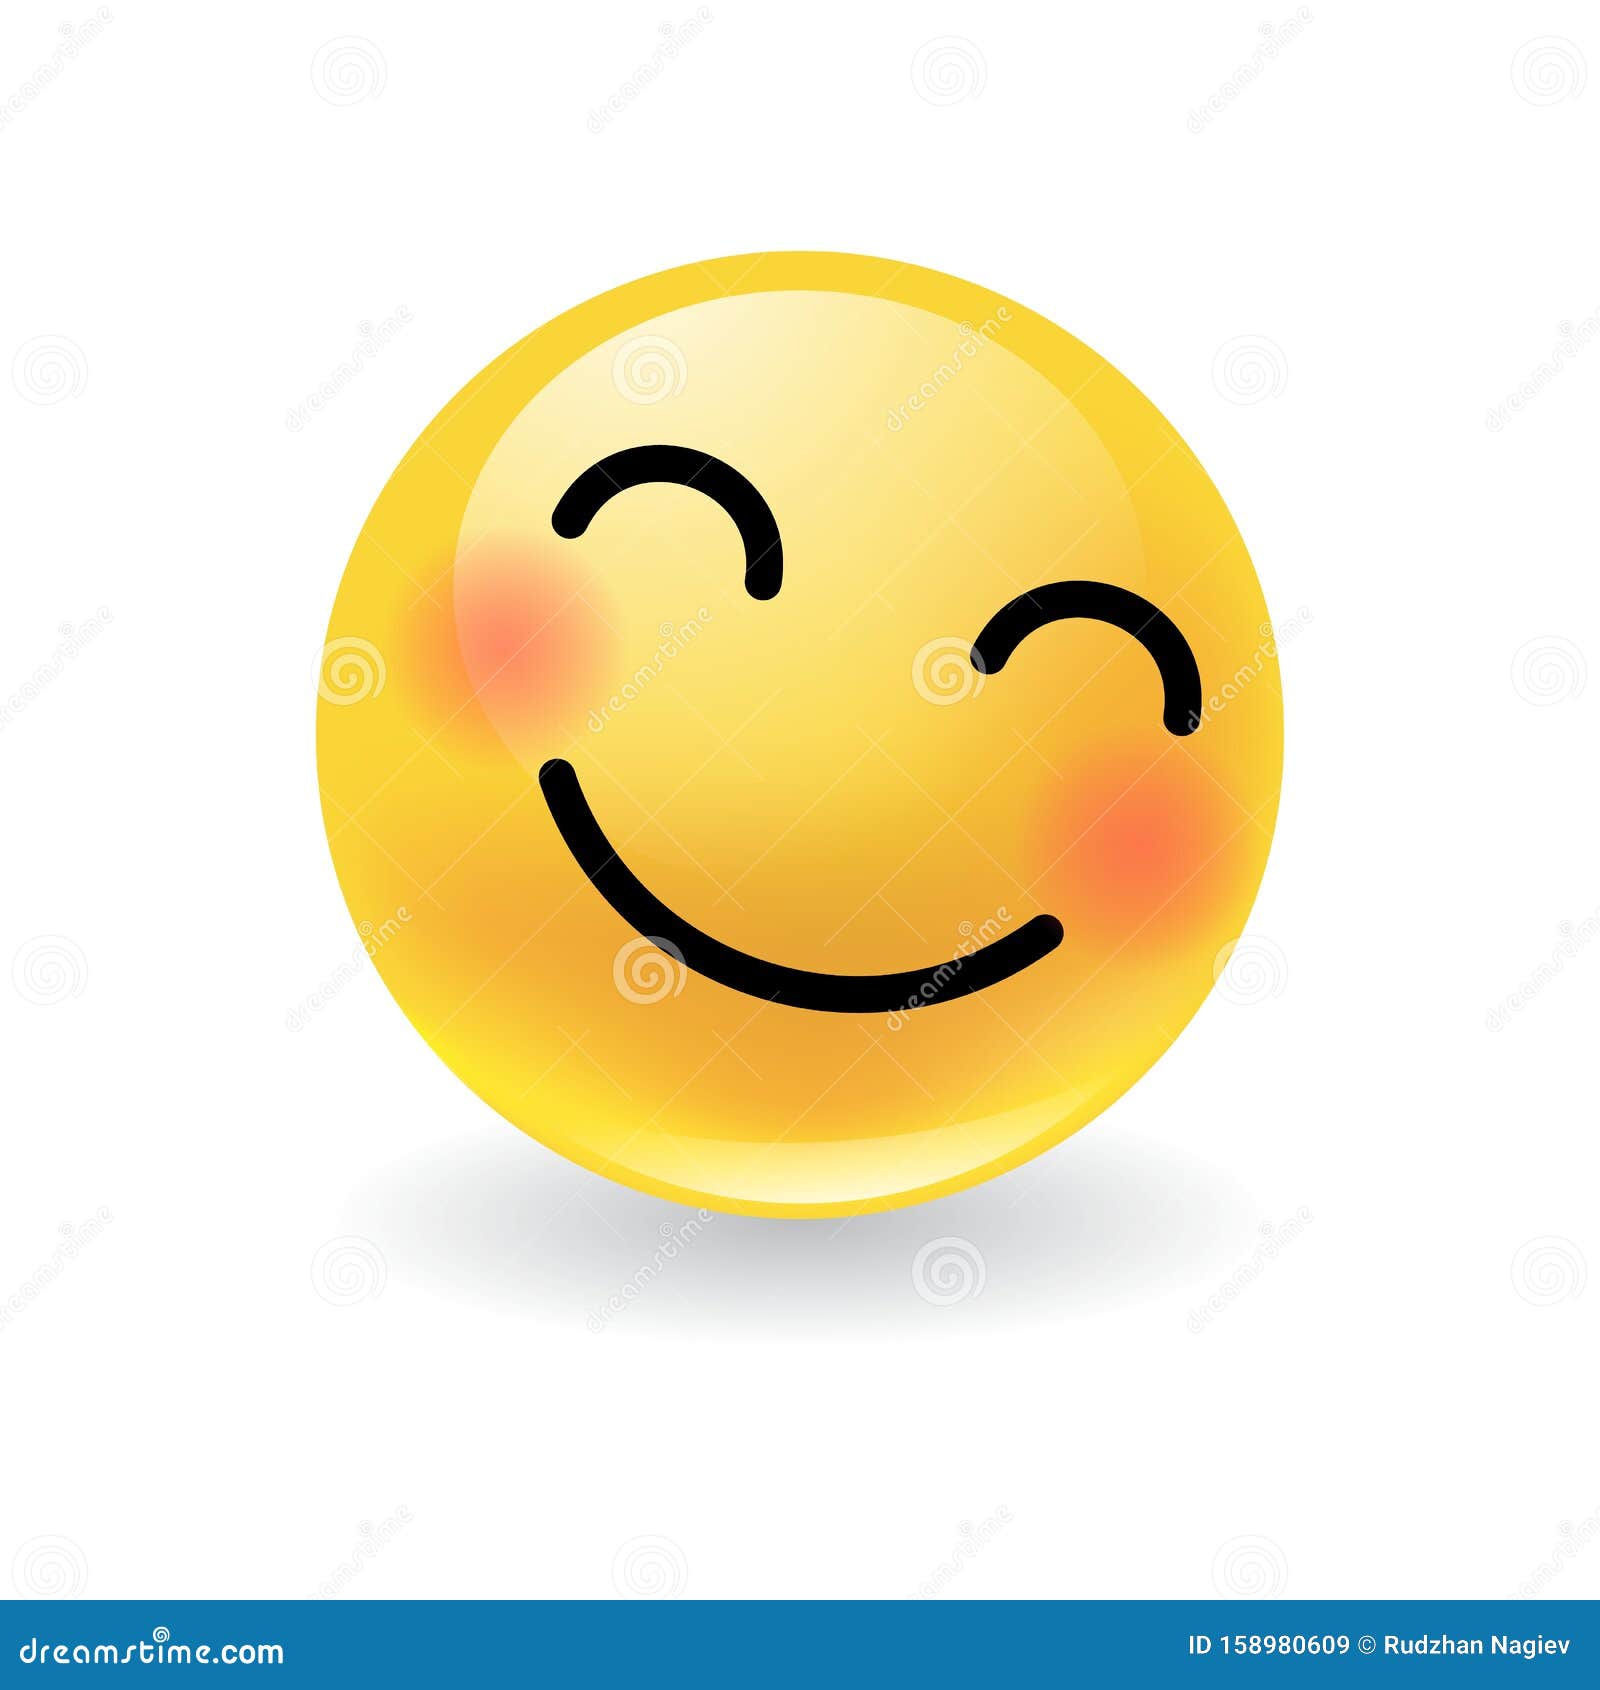 Cute Yellow Round Emoticon Smiling And Blushing Stock Vector - Illustration...